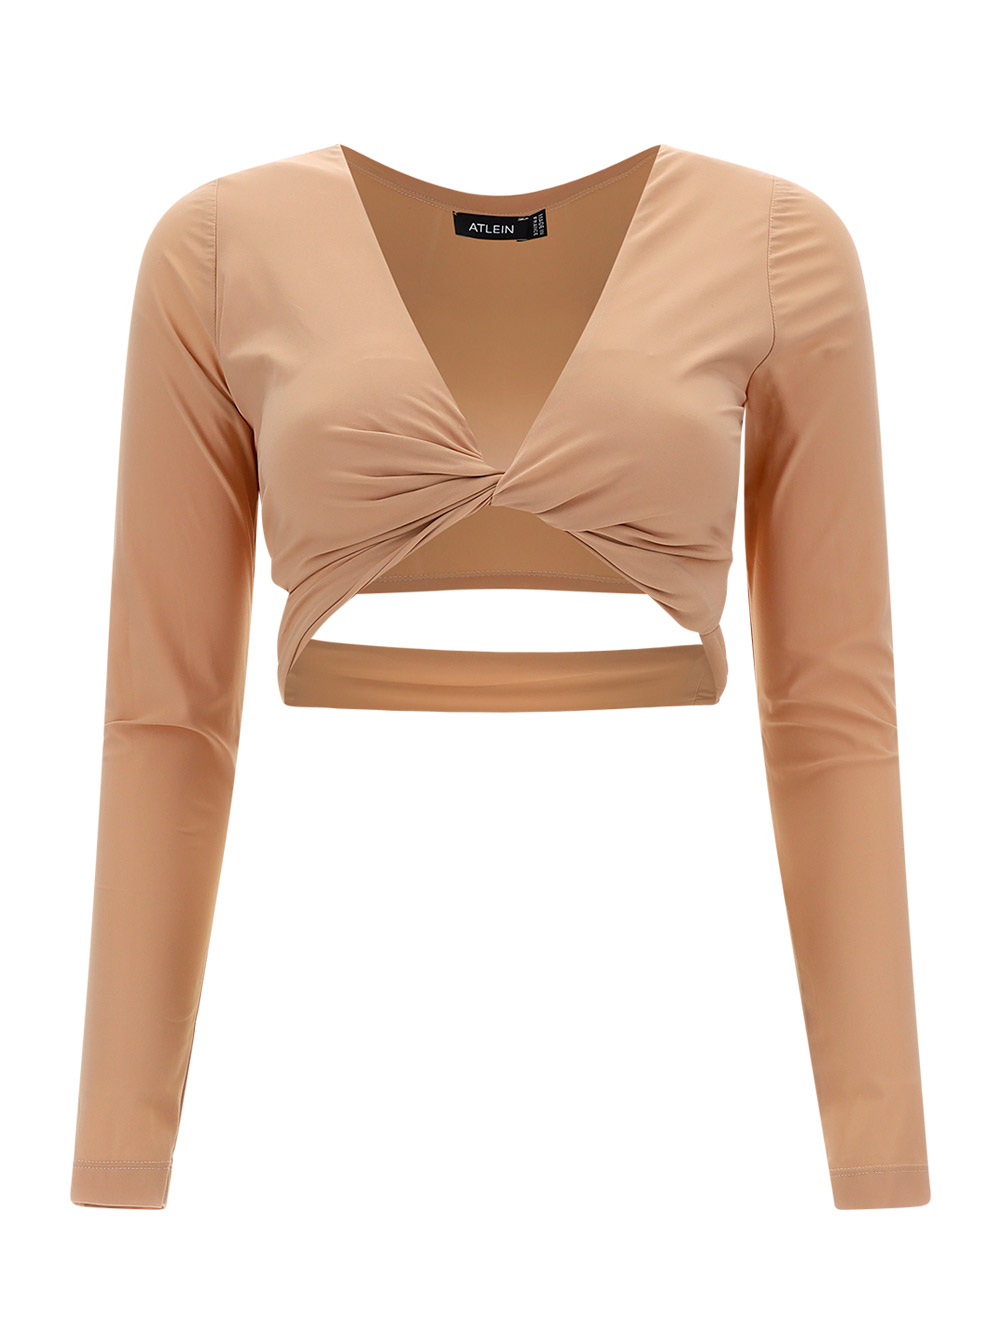 Atlein Top In Soft Fawn